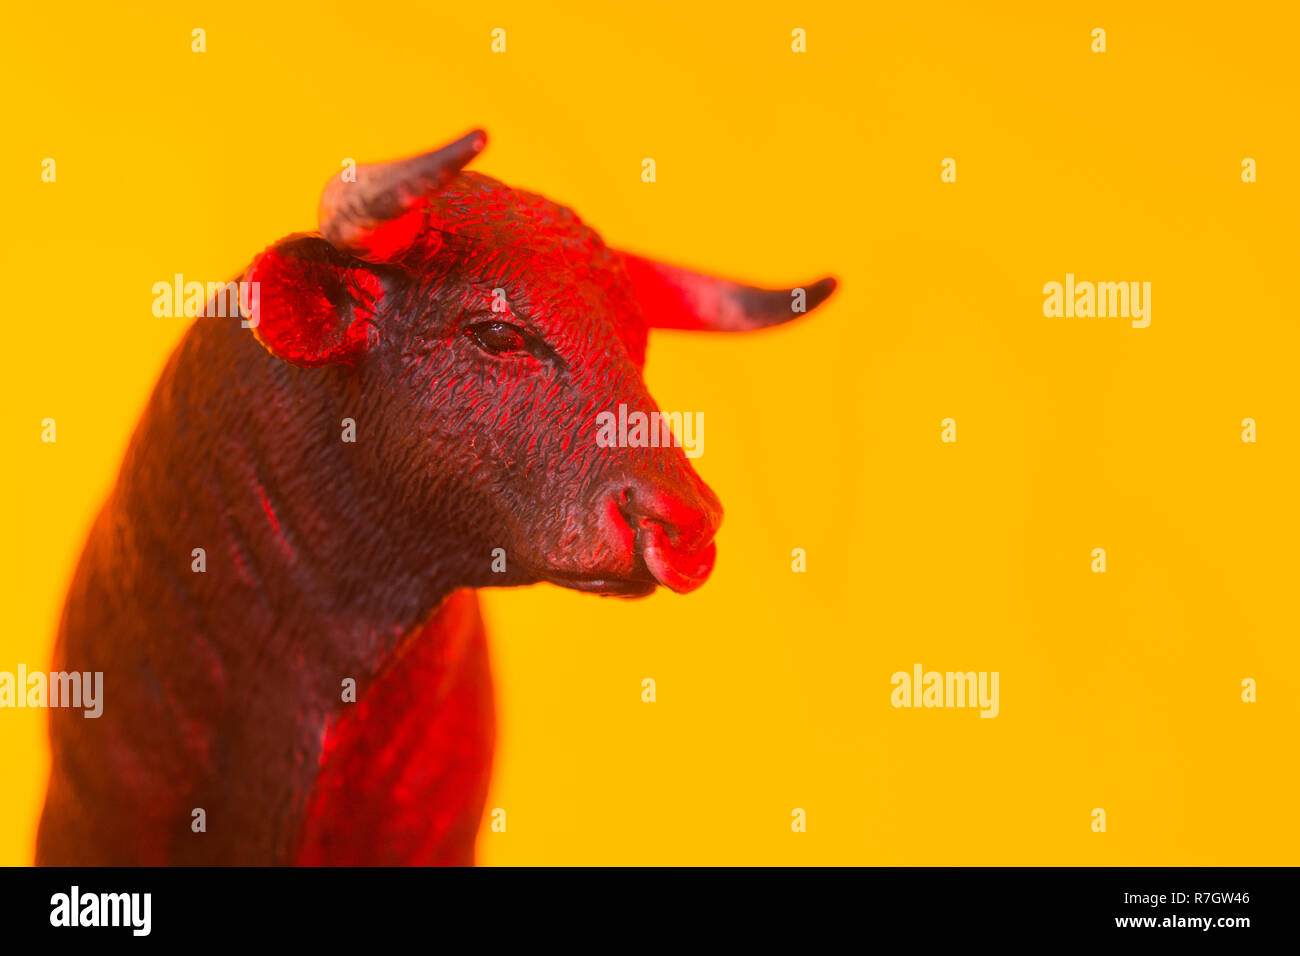 Toy bull against orange-yellow glowing sunset type backdrop. Metaphor for 'confidence' and Stock Market bulls, bullishness. See ADD. DETAILS NOTE Stock Photo